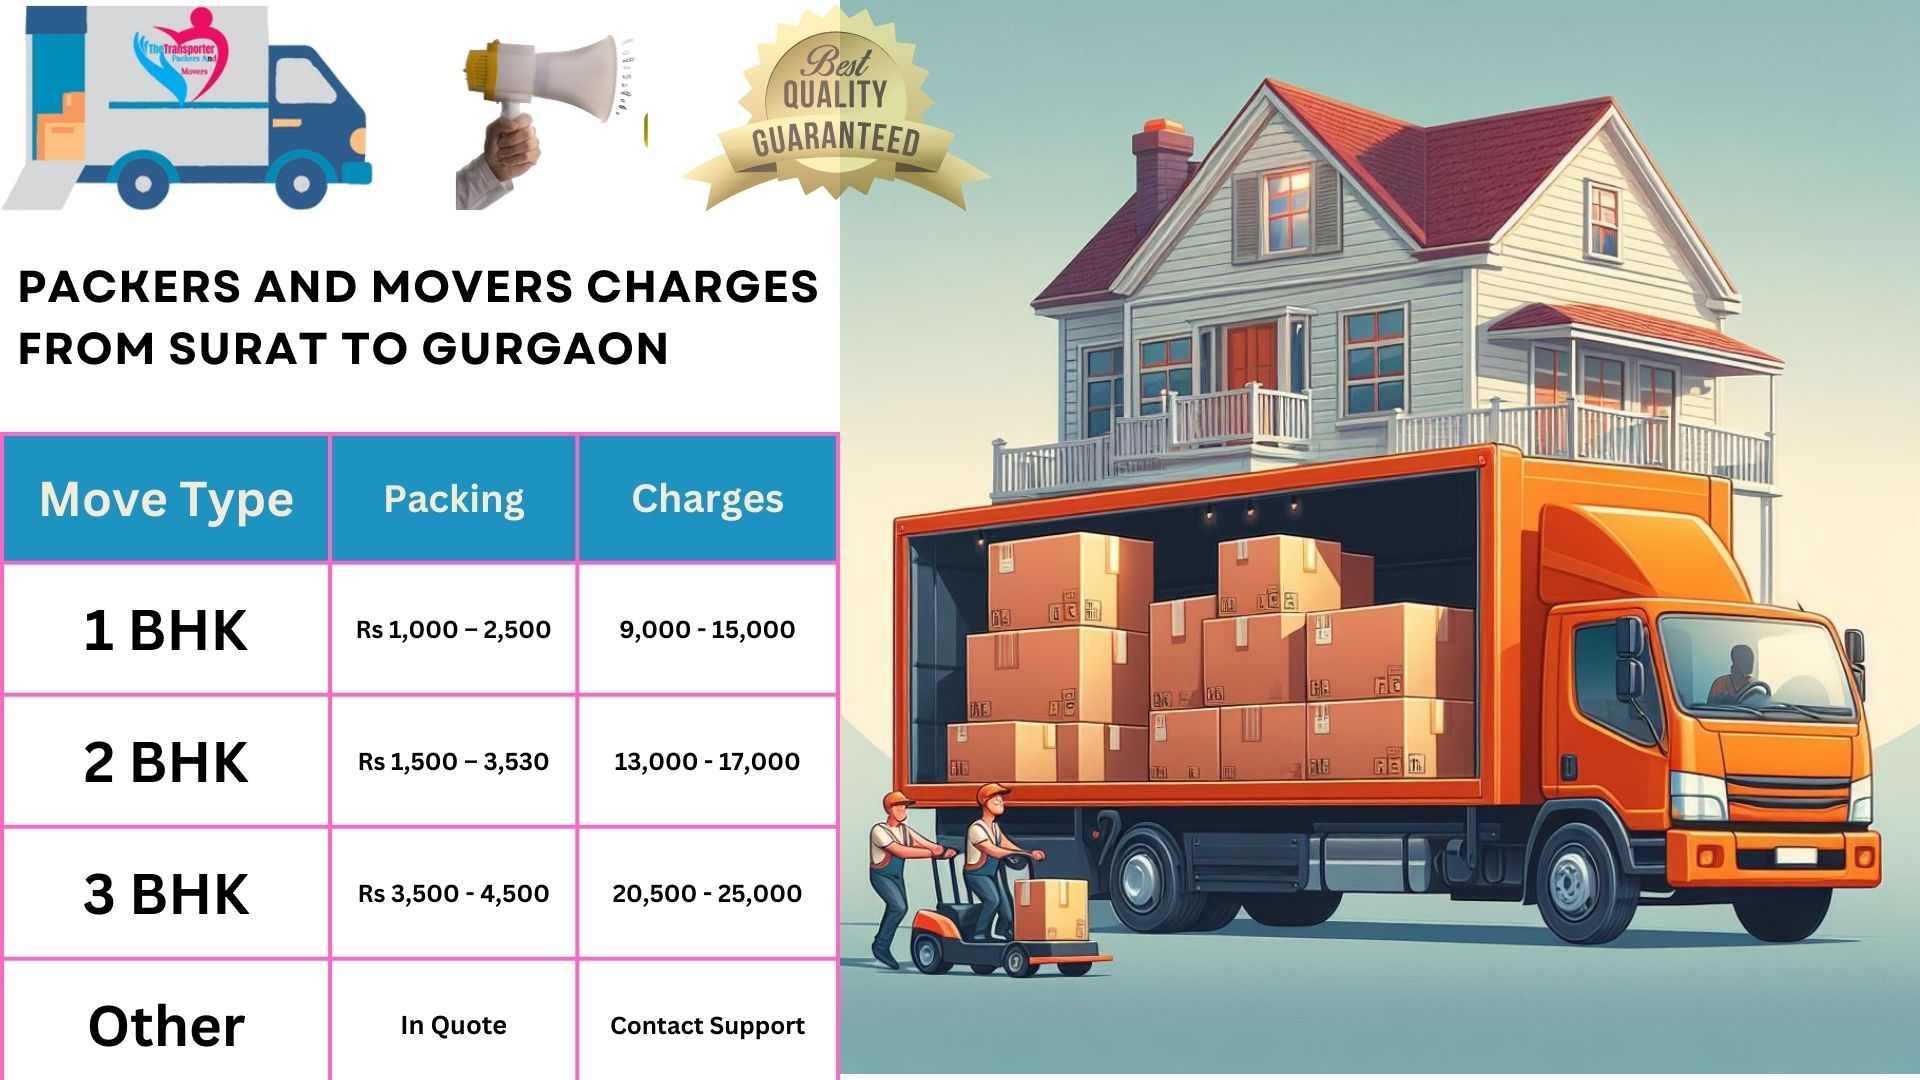 Movers and Packers charges list From Surat to Gurgaon